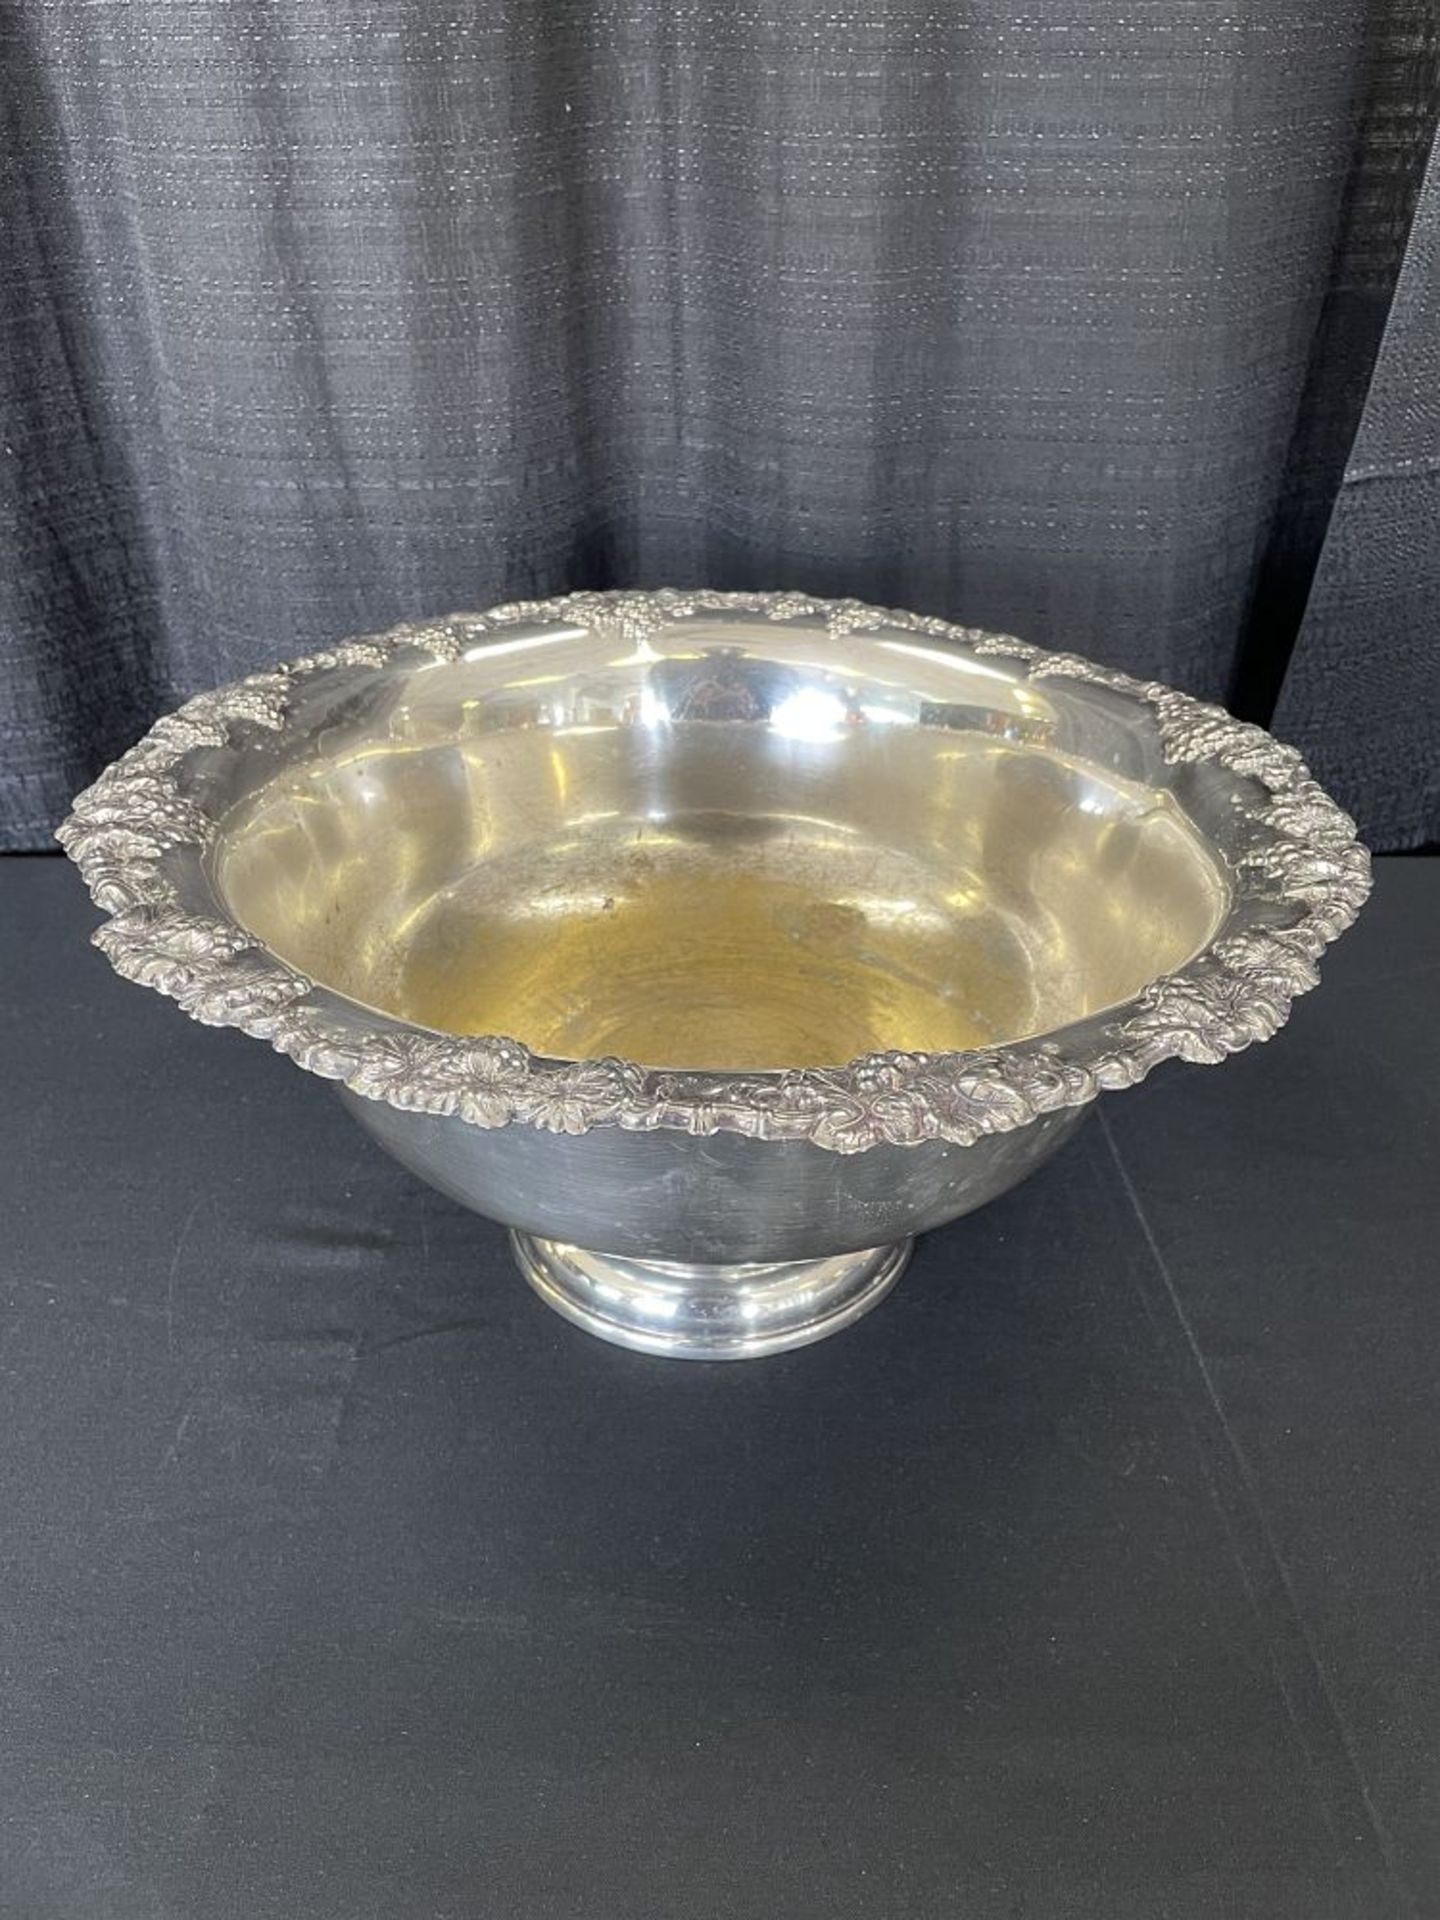 17" Silver Plate Punch Bowl w/ Decorative Edge